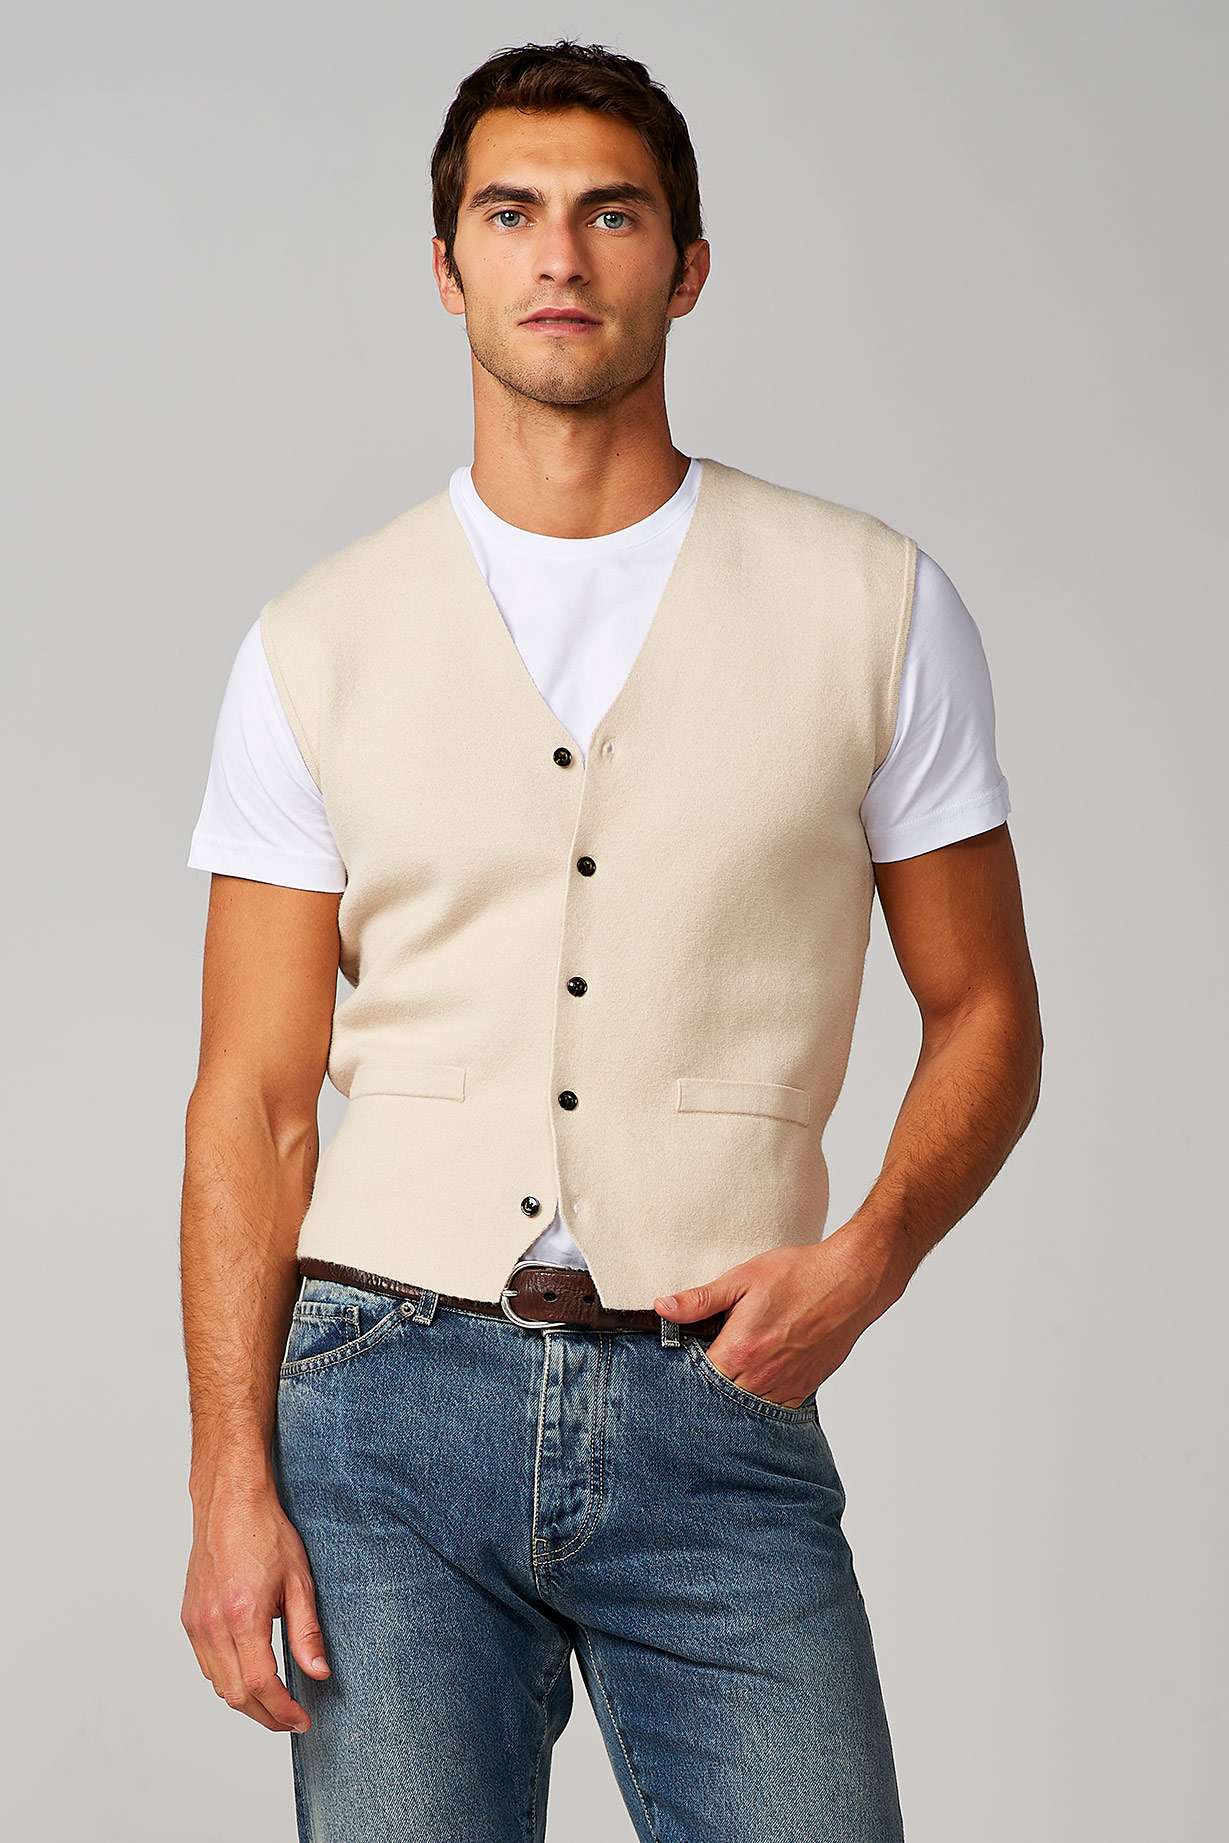 BEIGE KNITTED VEST WITH BUTTONS